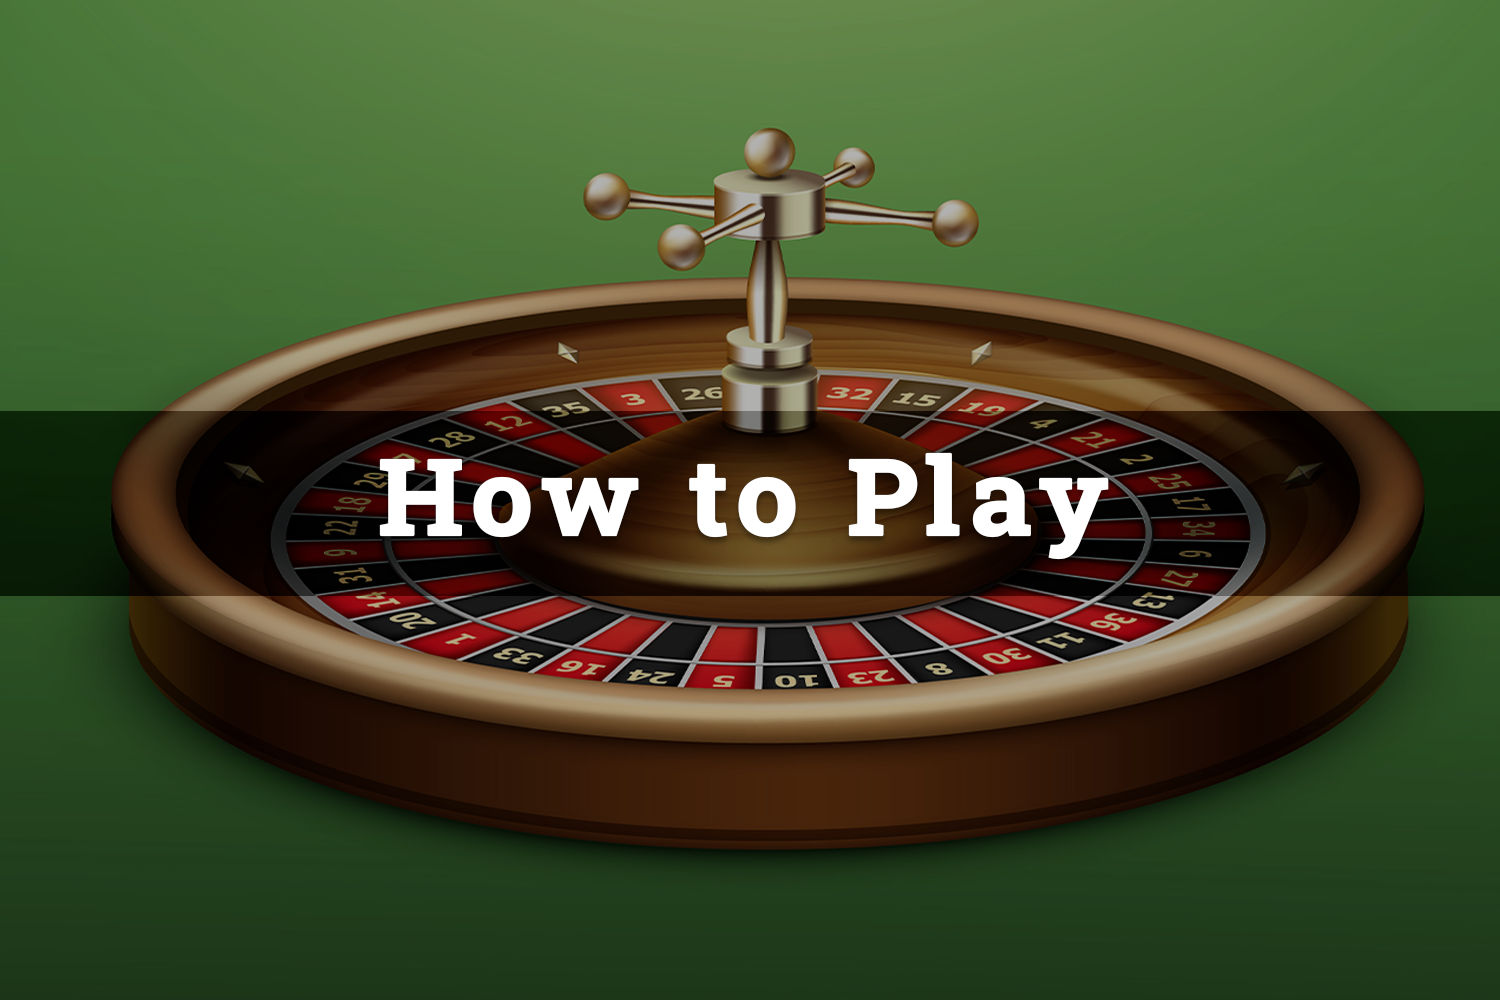 How to play online roulette ihovtb